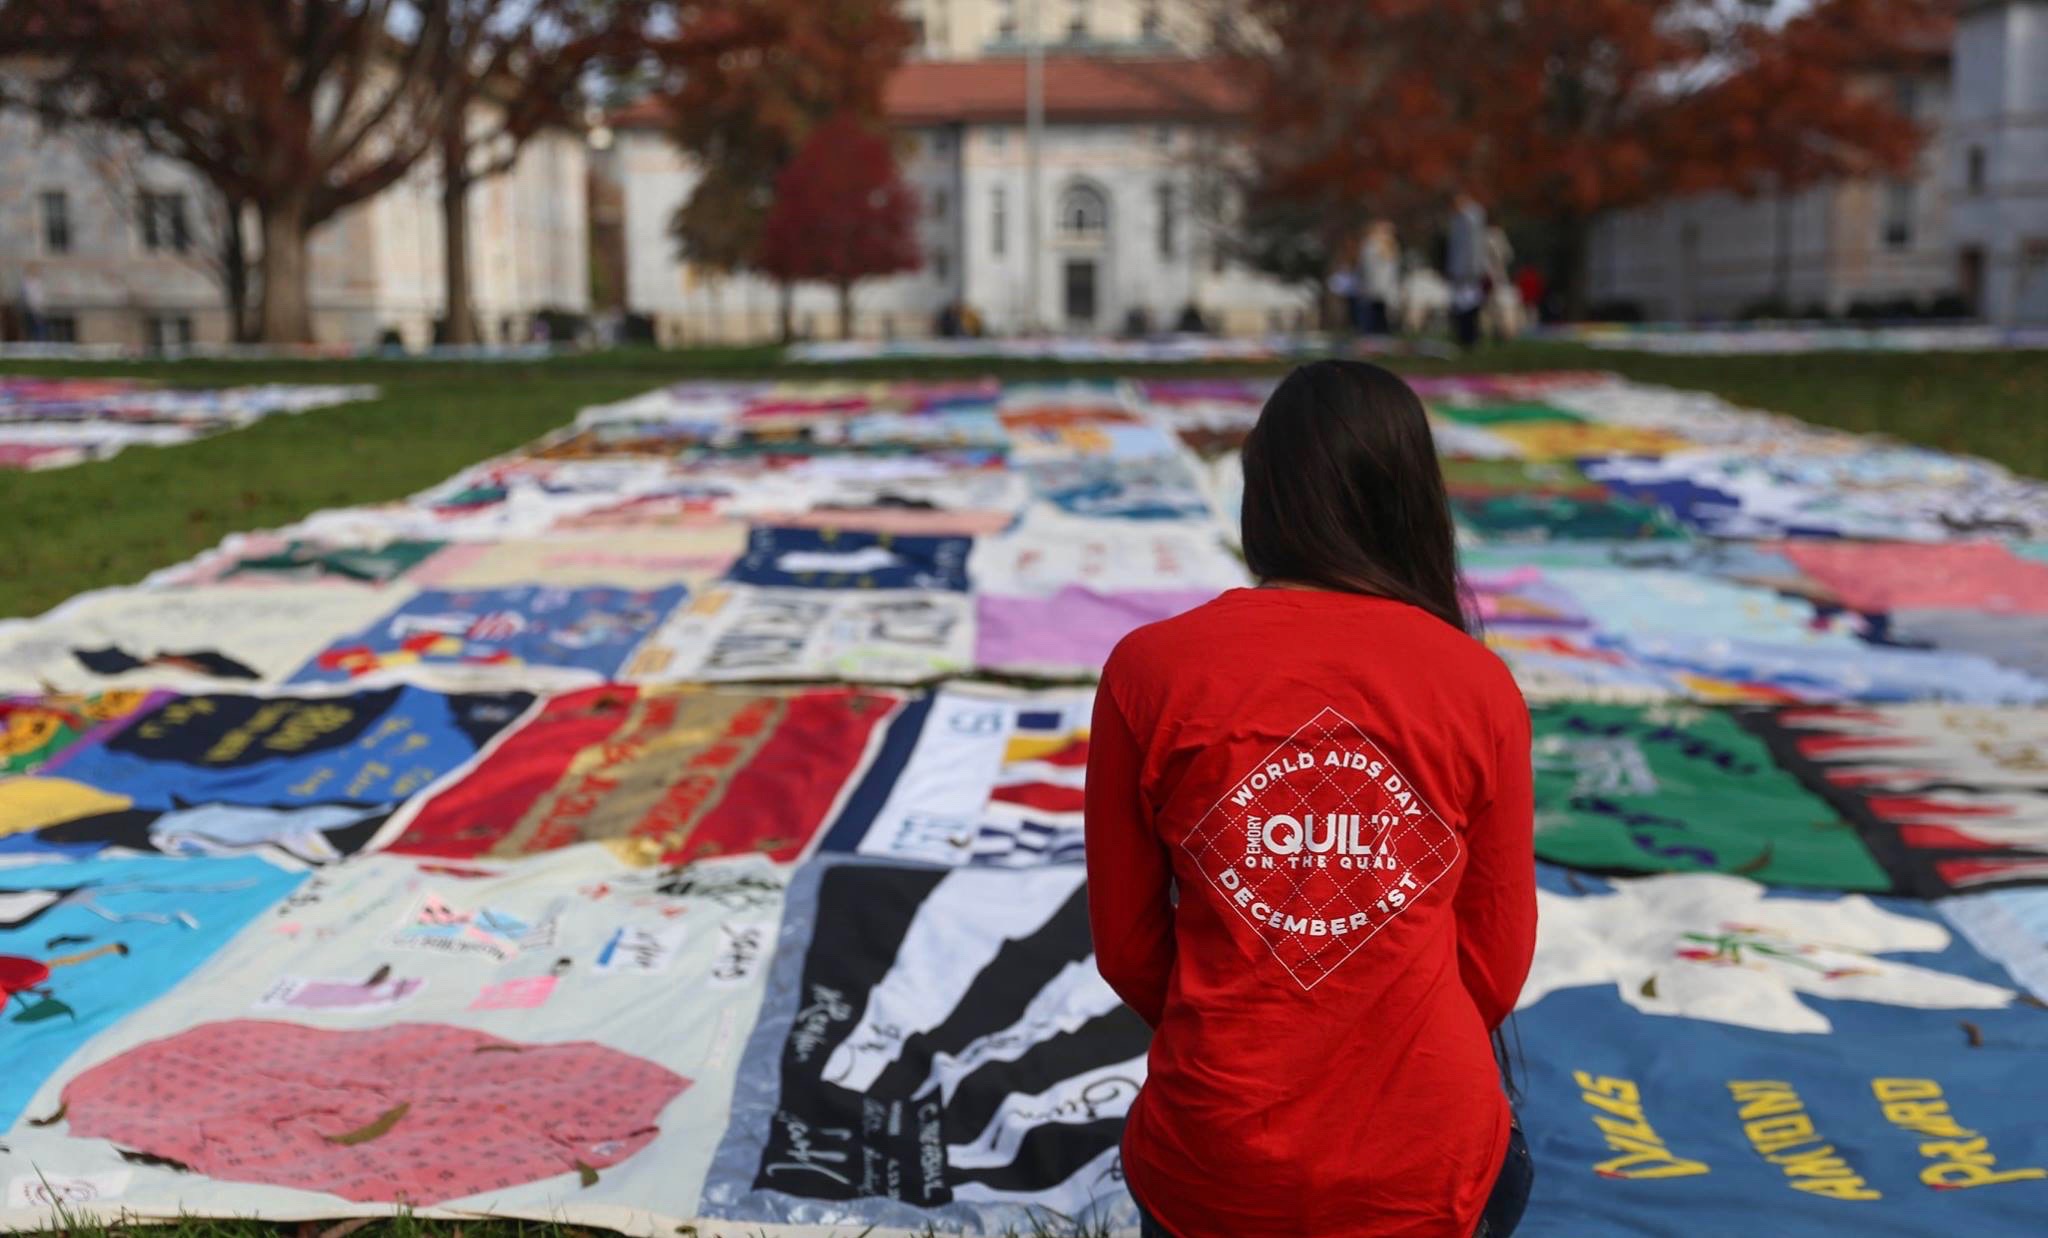 Emory AIDS quilt 